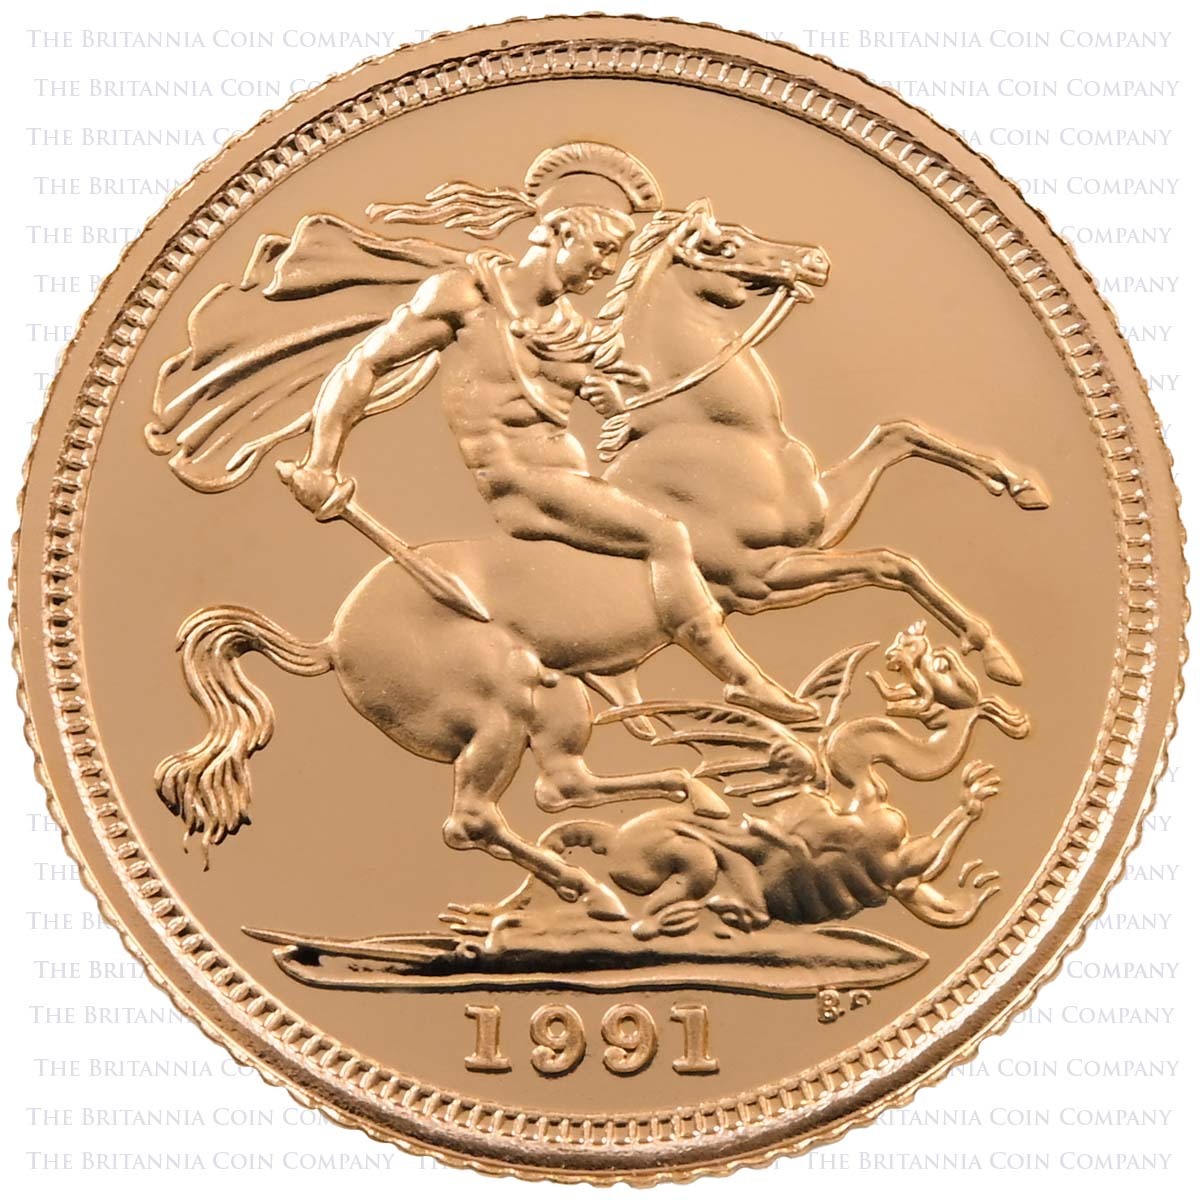 1991 Gold Proof Half Sovereign Reverse